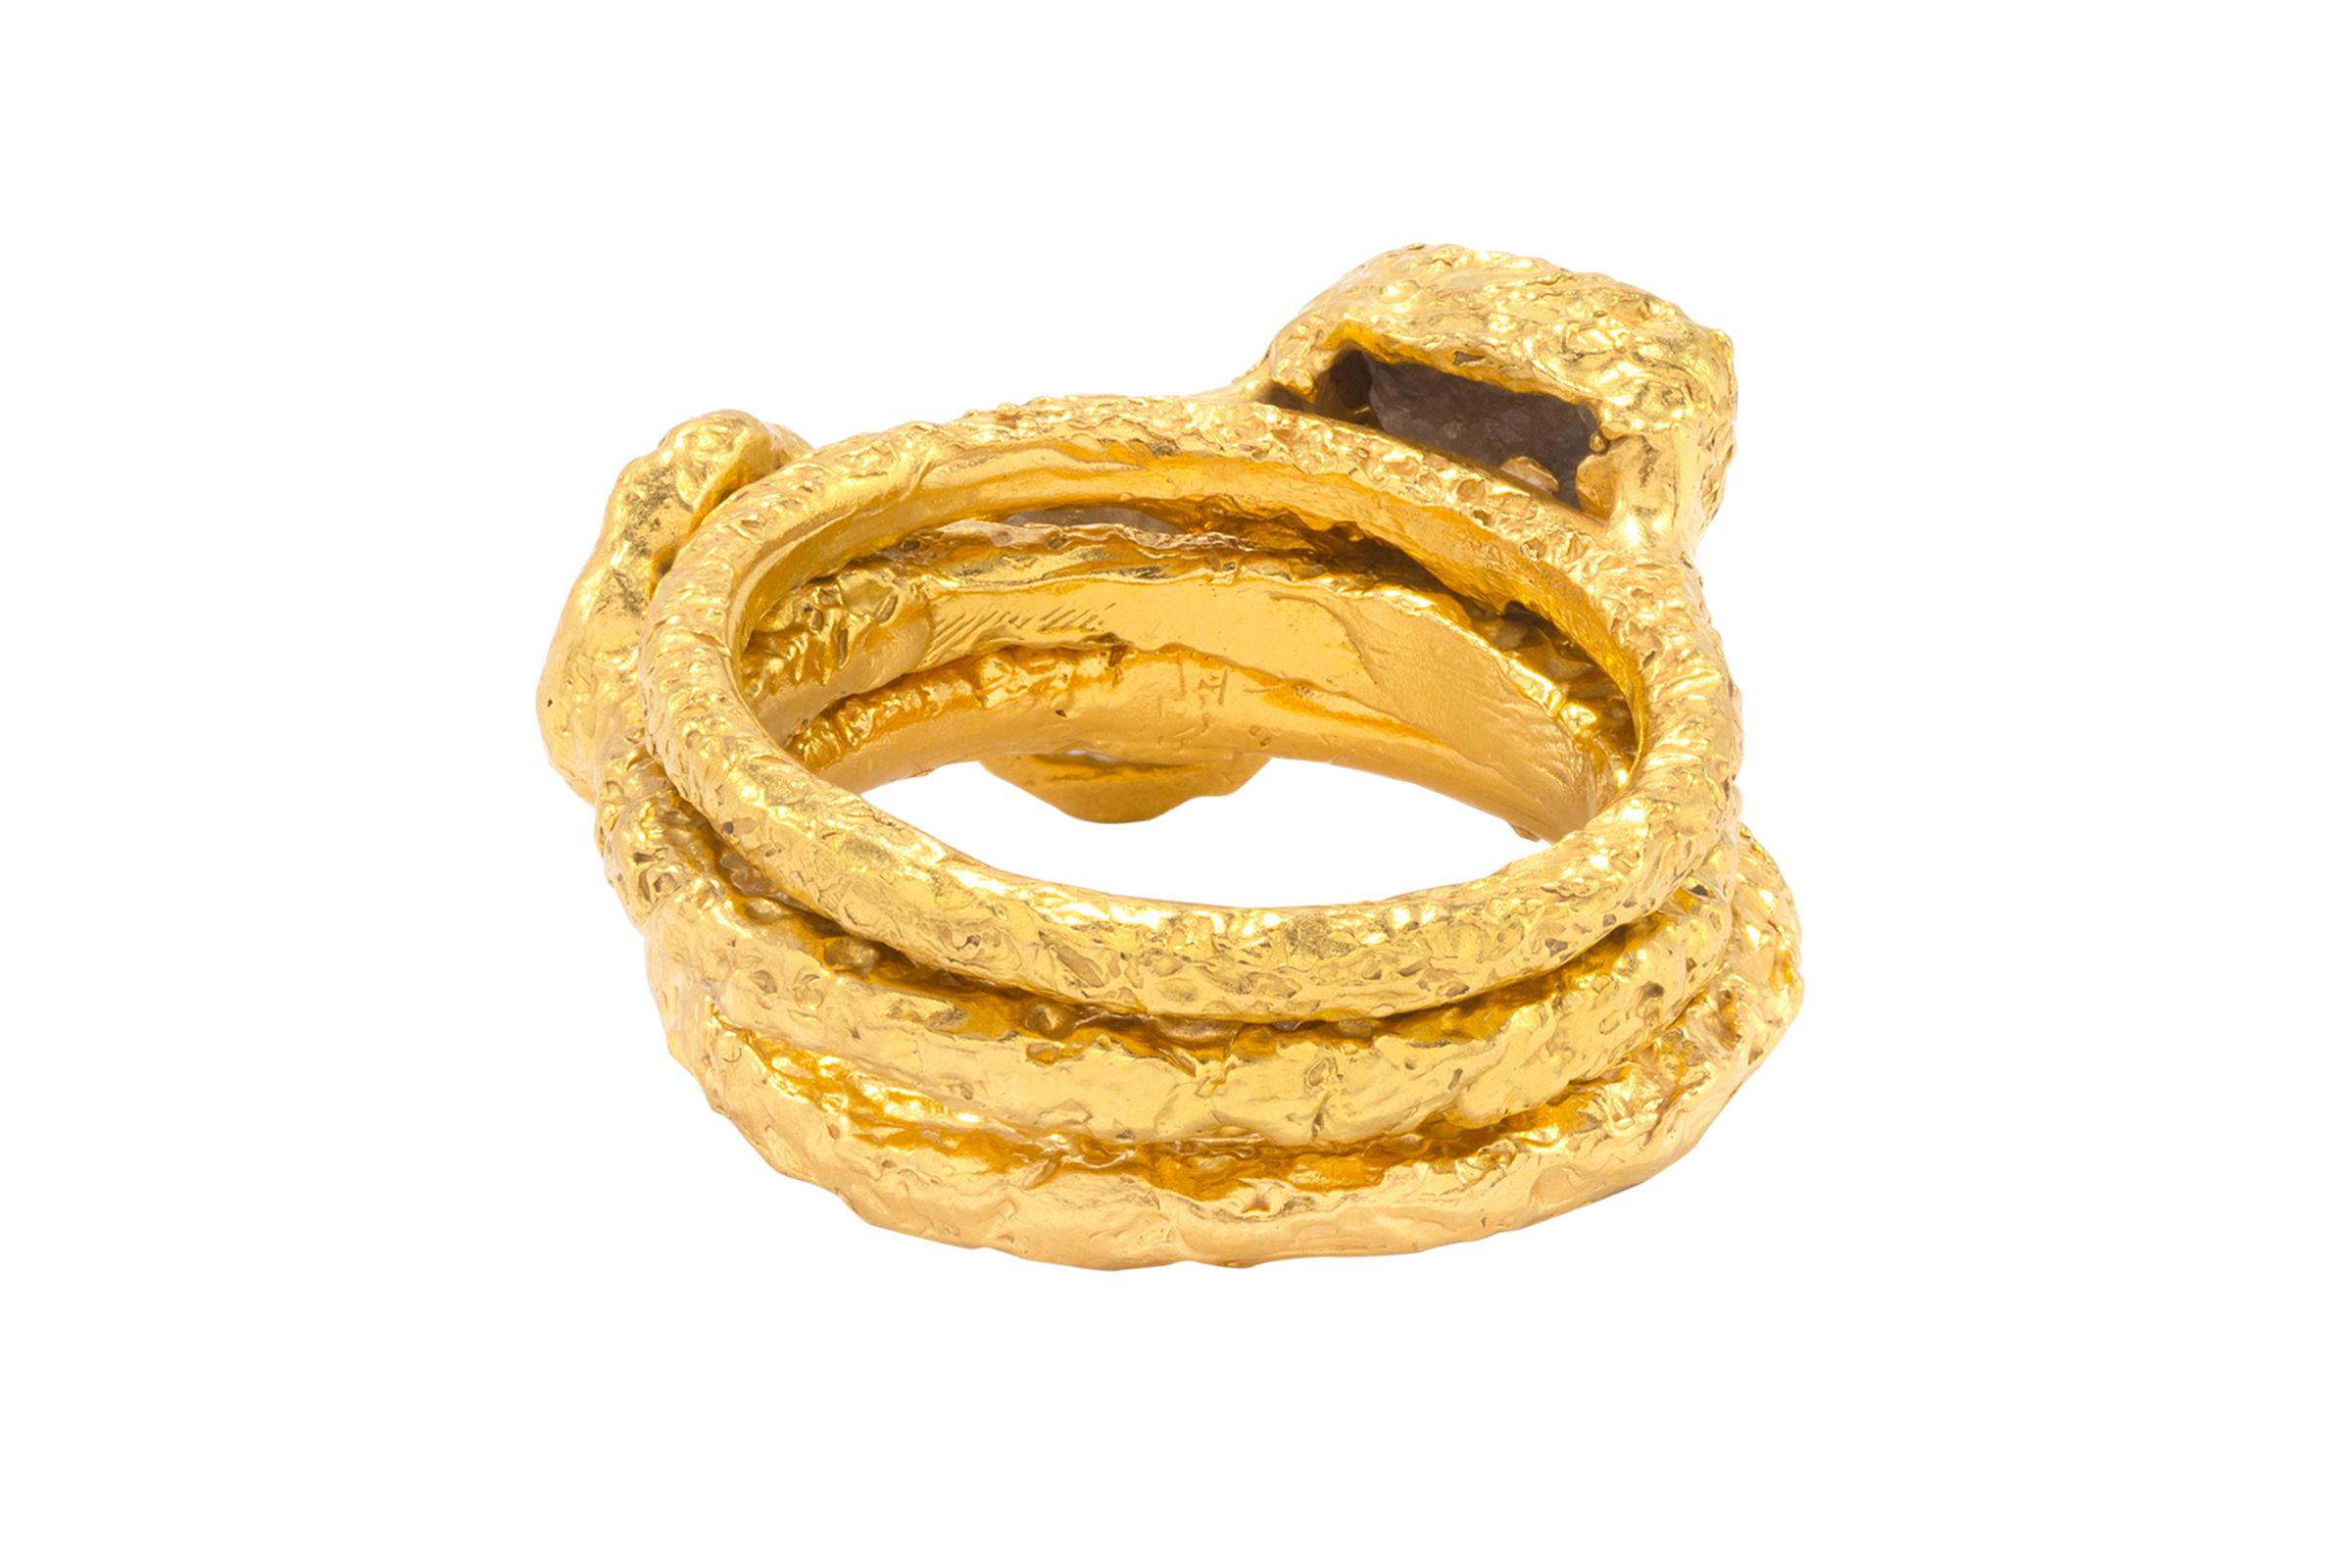 Rough Diamond Stacking Rings in 22k Gold by Tagili 3